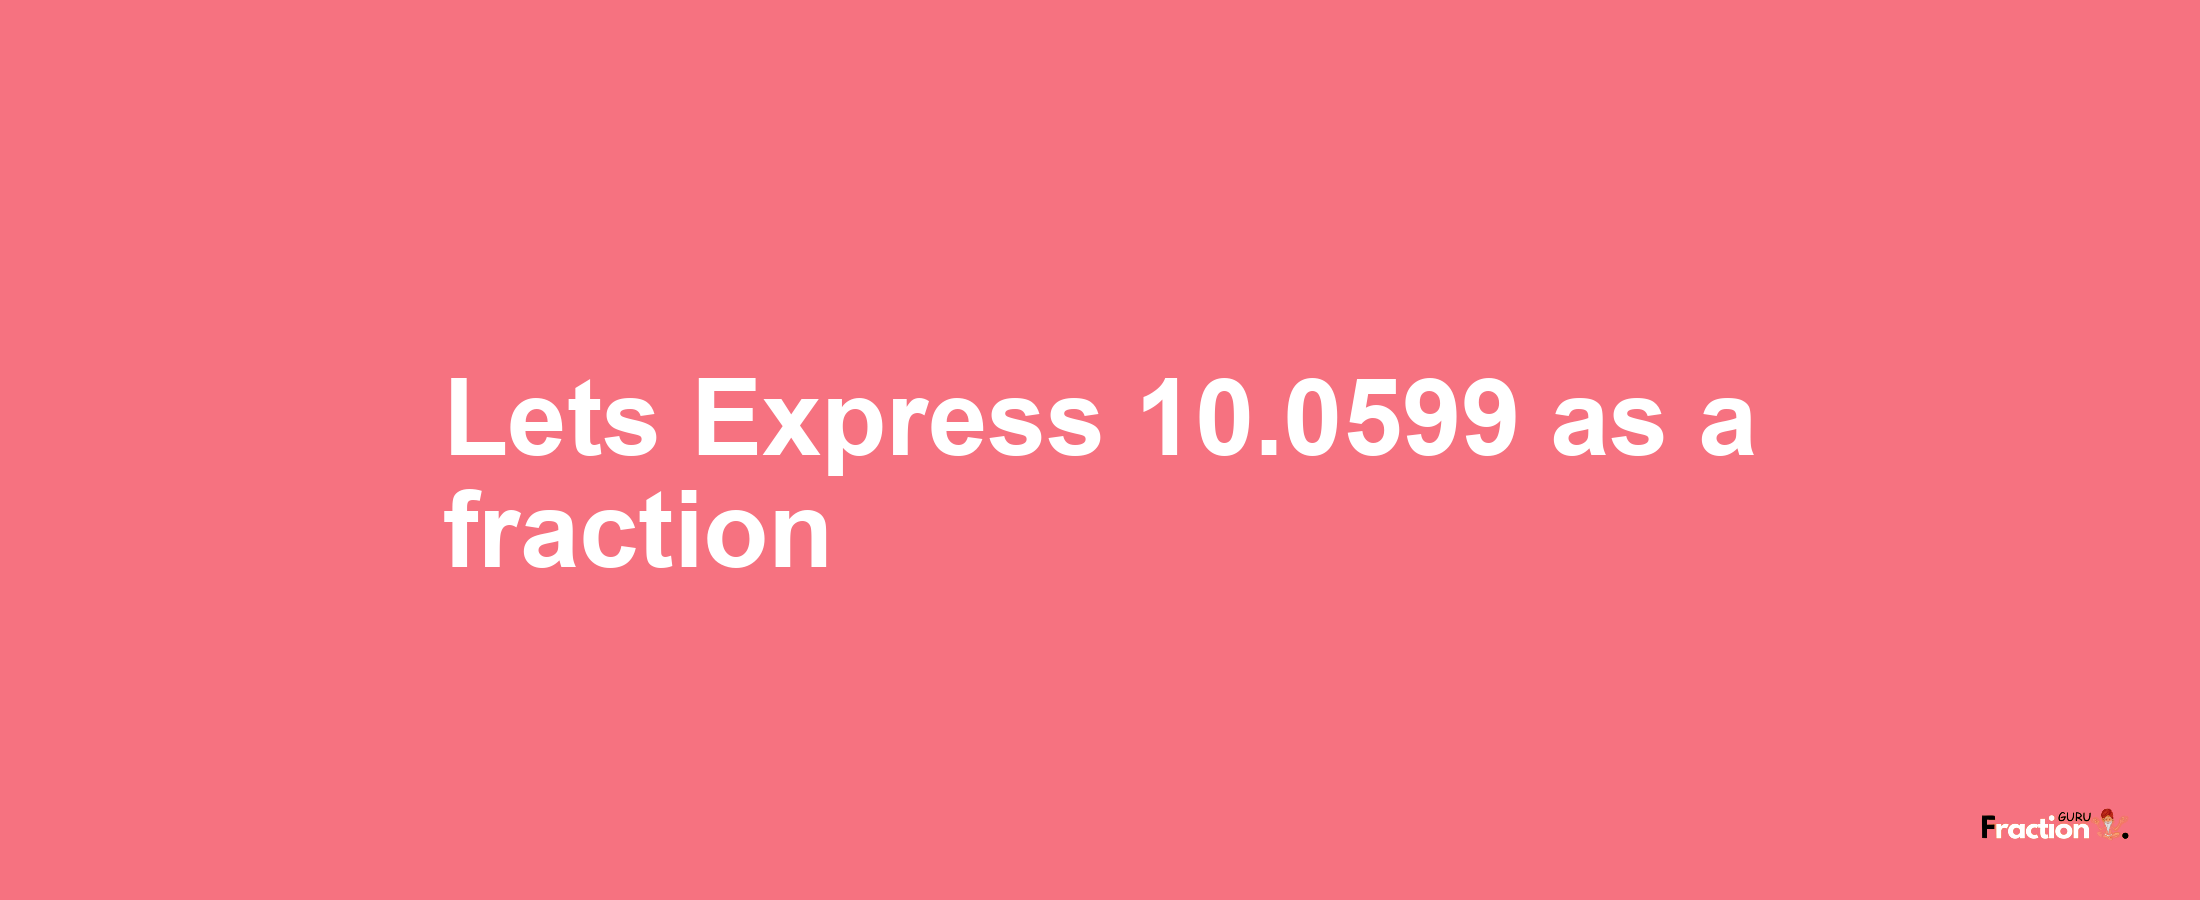 Lets Express 10.0599 as afraction